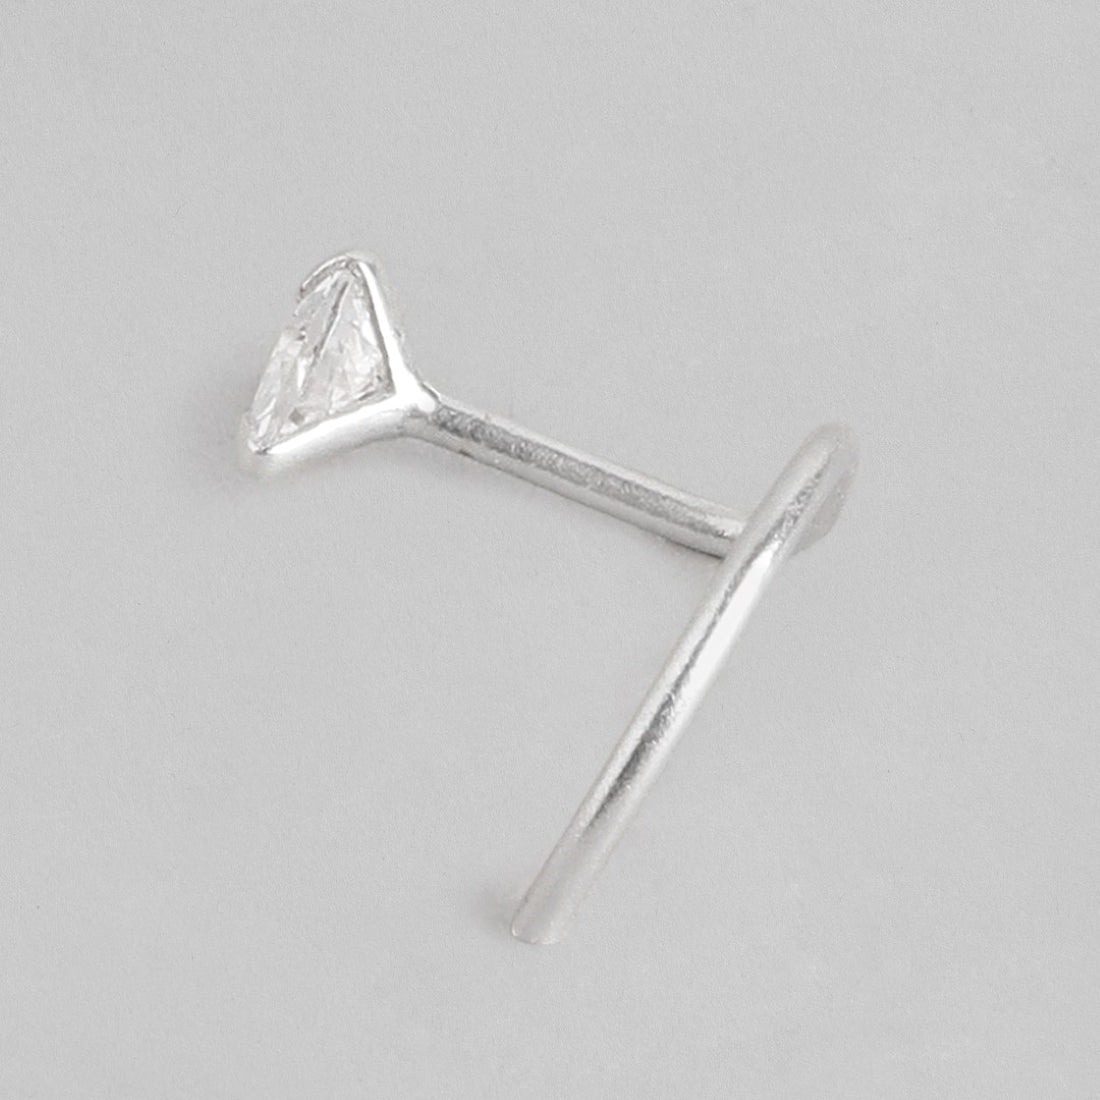 Tiny Heart Solitaire 925 Silver Nose Pin